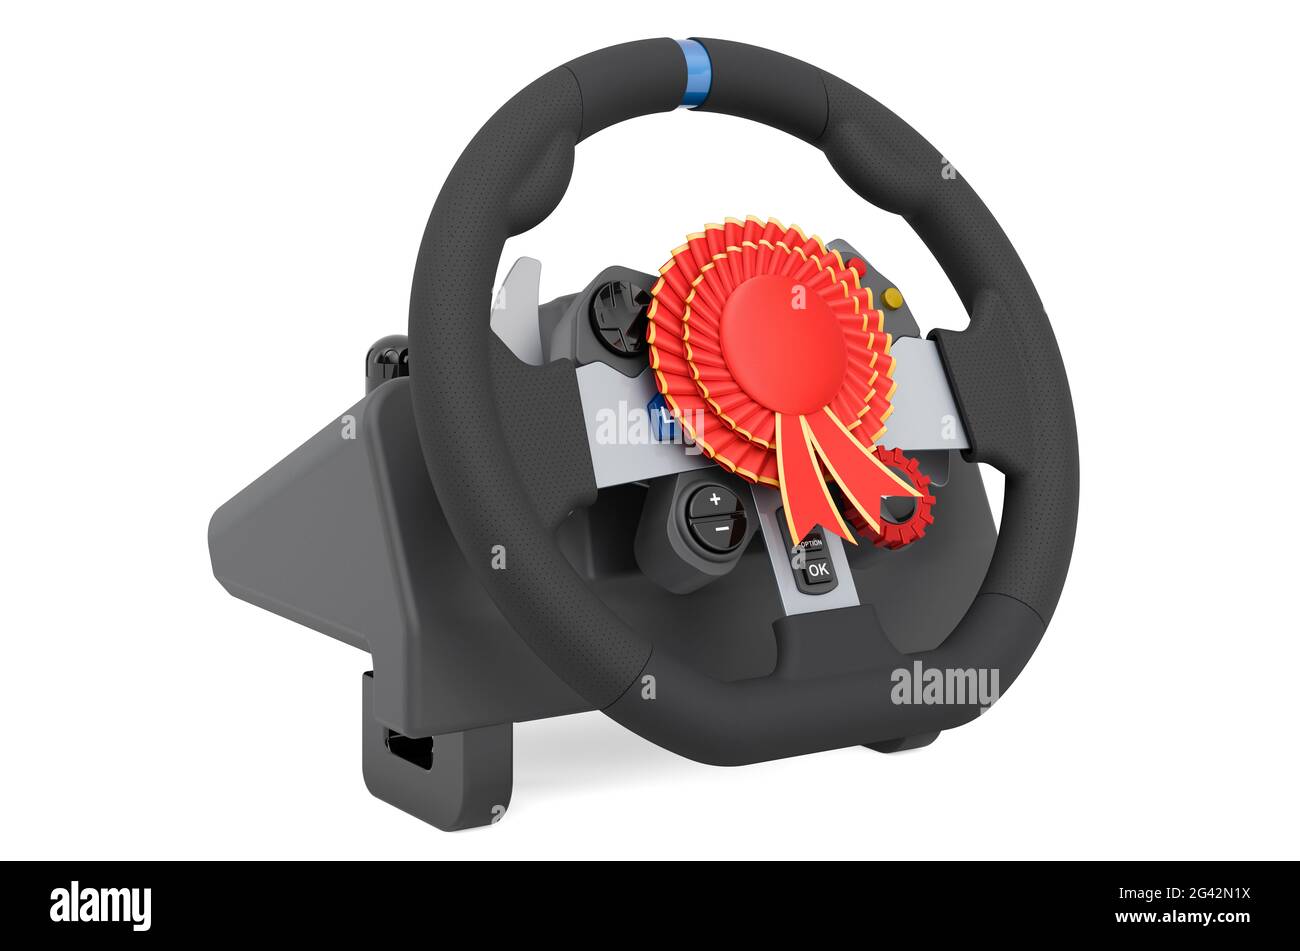 Gaming steering wheel with best choice badge, 3D rendering isolated on white background Stock Photo